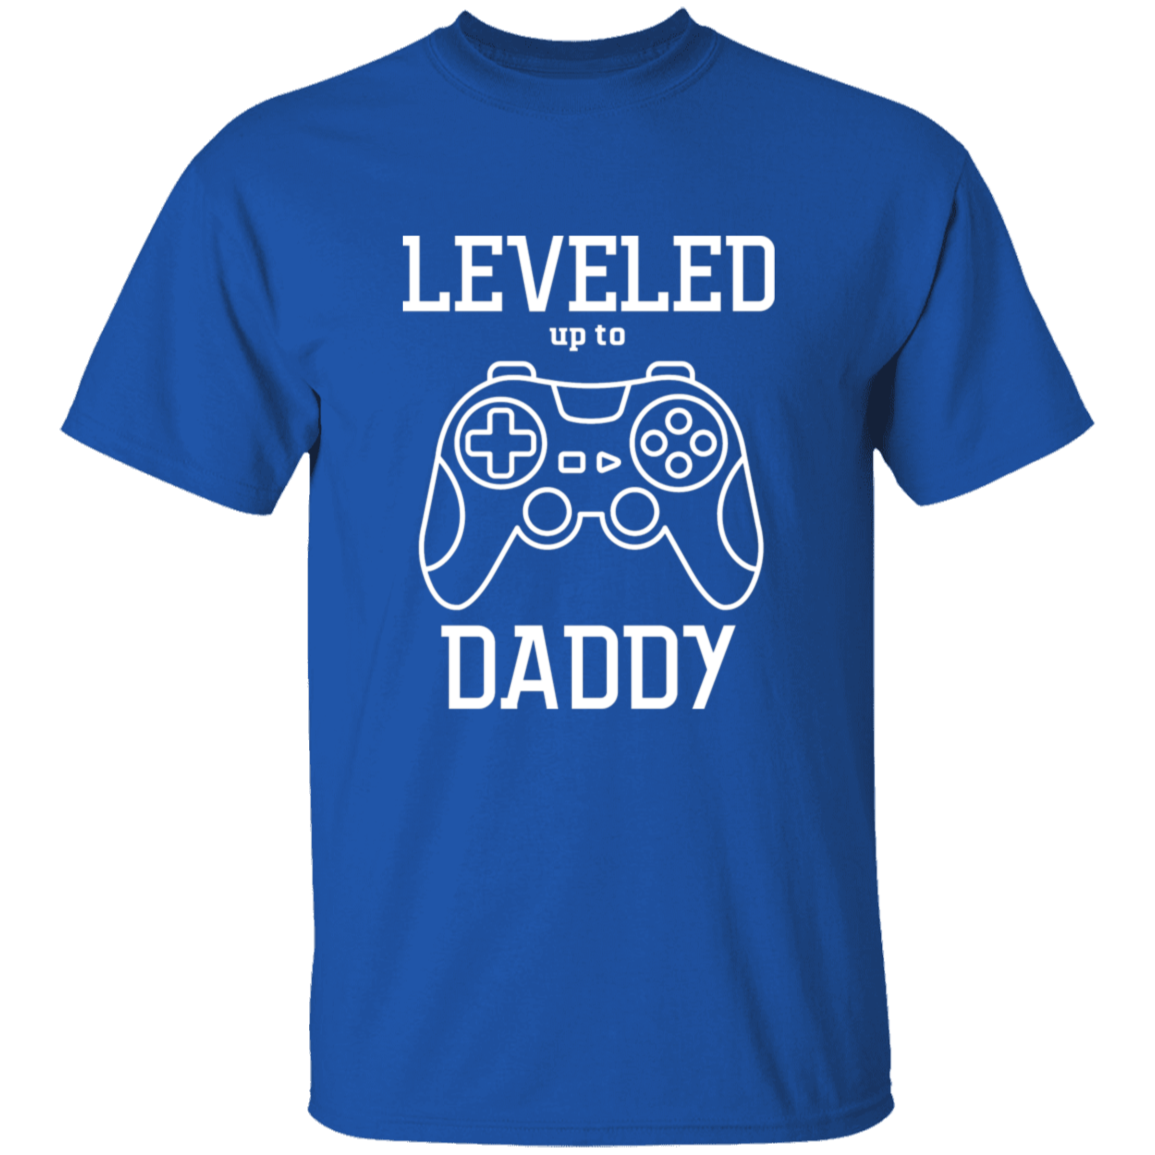 Leveled up DADDY and Baby